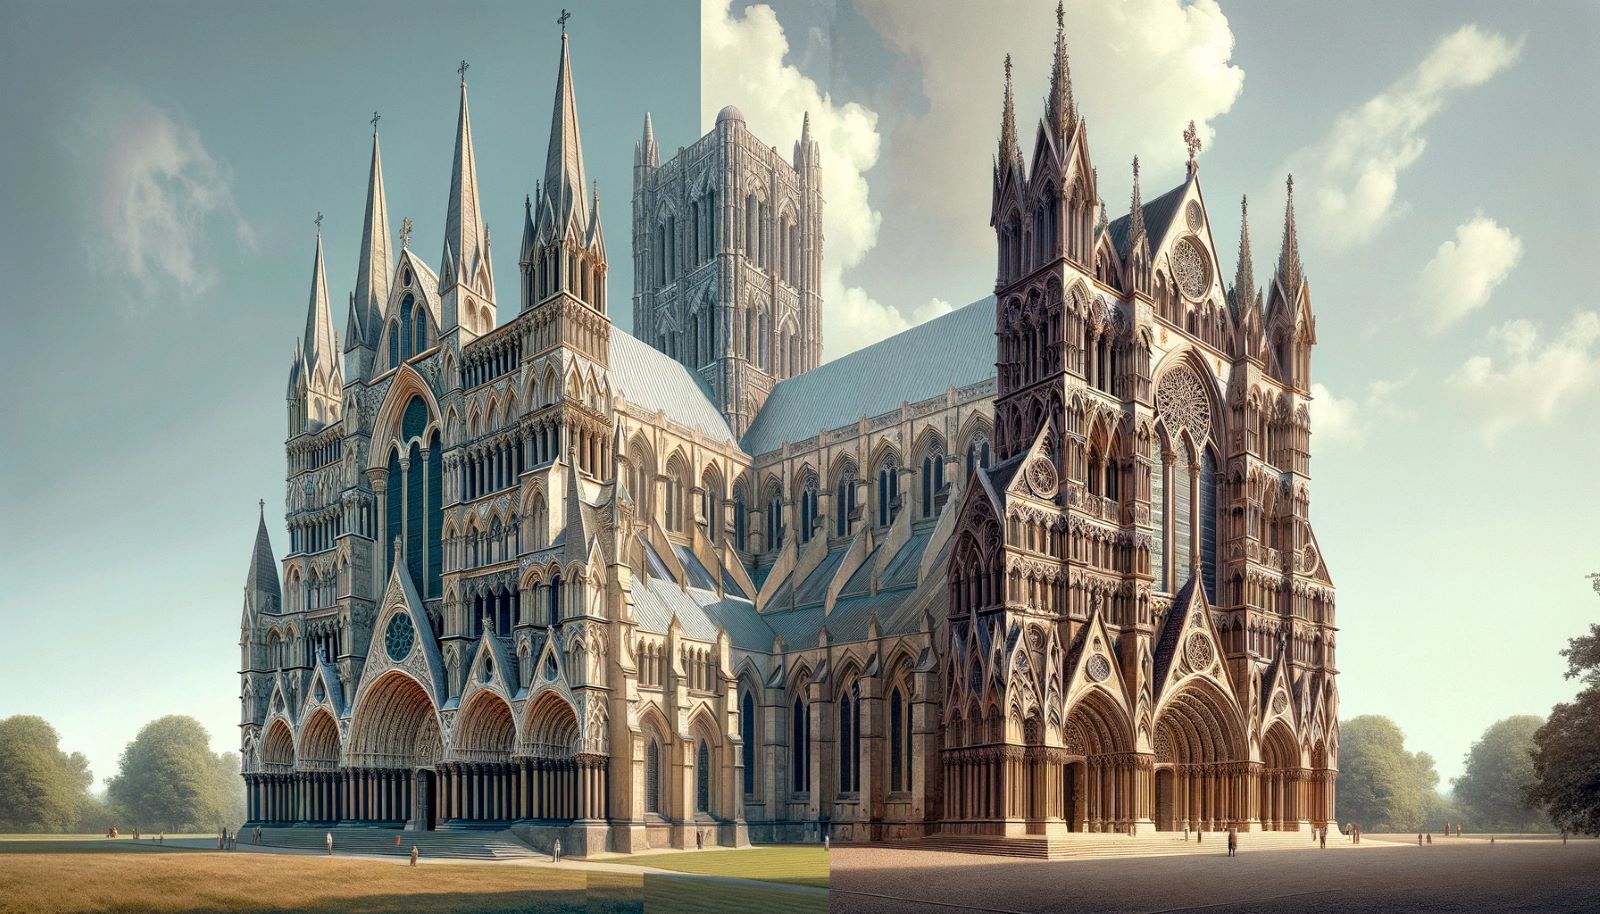 How Does Salisbury Cathedral Differ From Most Of The French Gothic Cathedrals